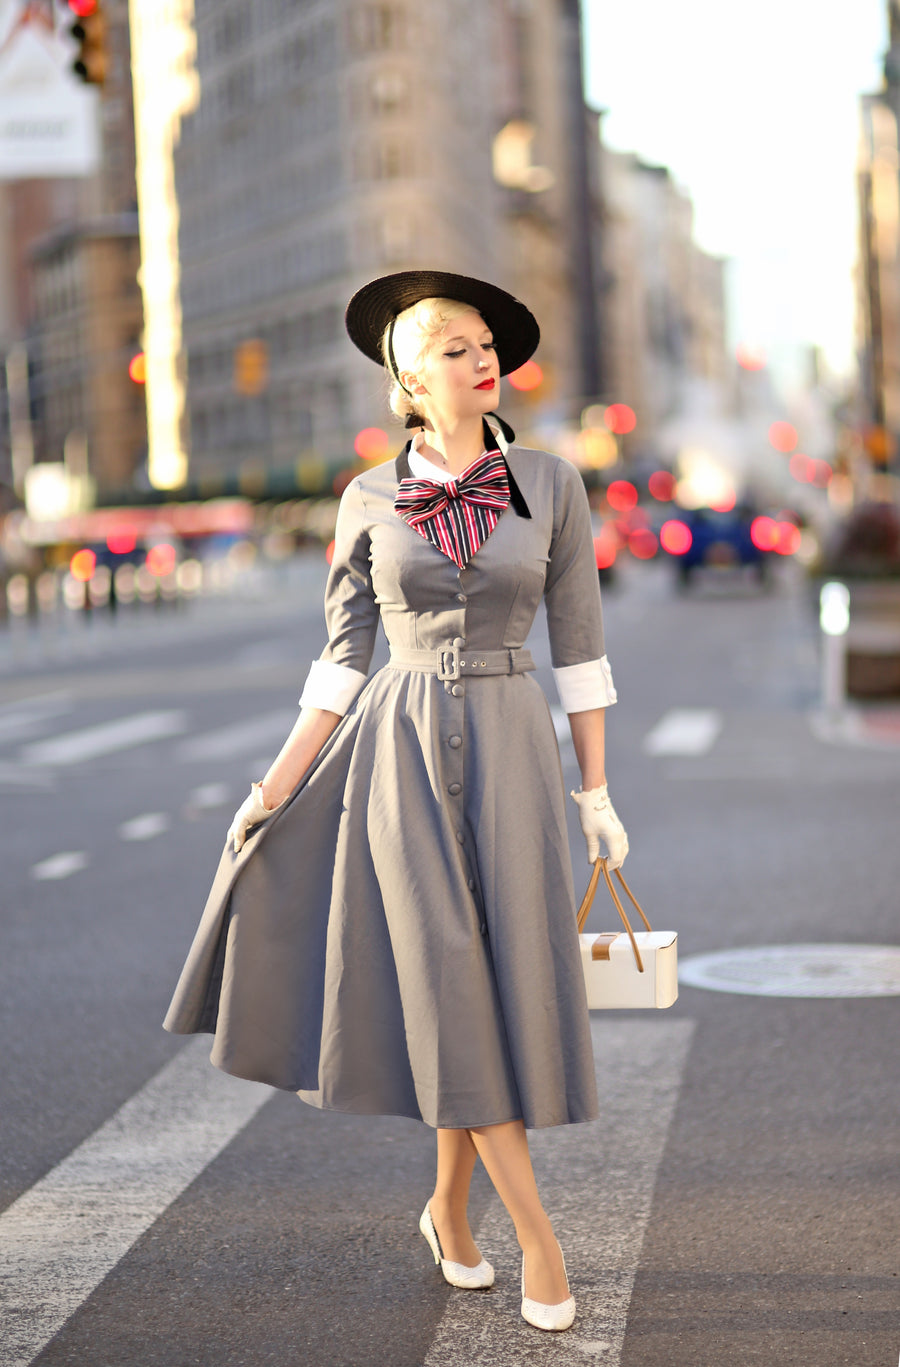 How To Style a Vintage Inspired Swing Dress – heartmycloset